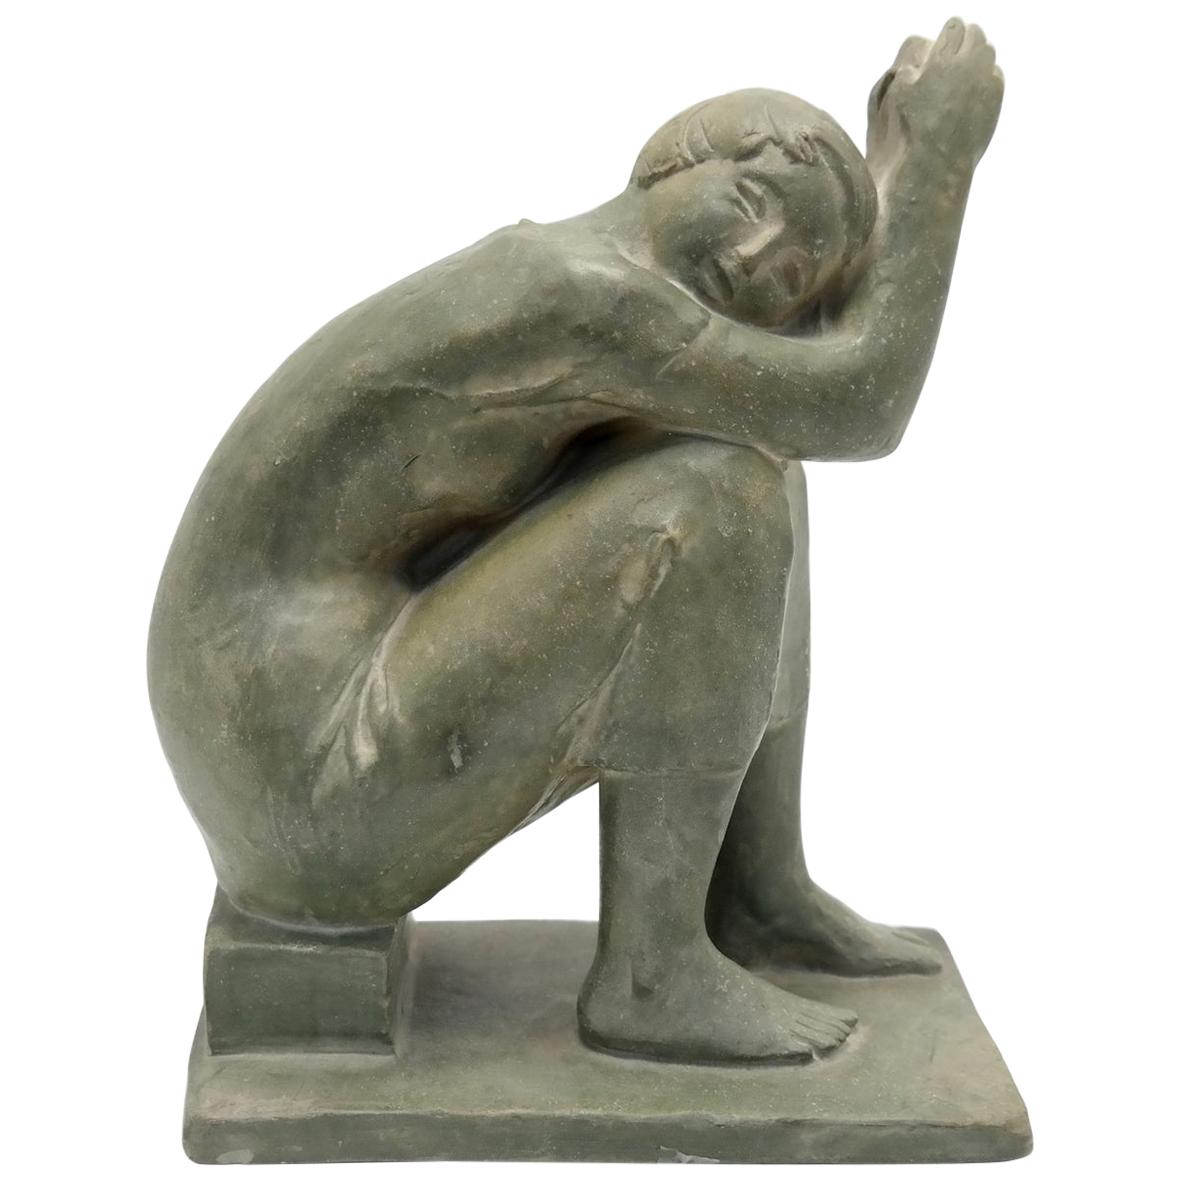 Sitting Nude Olive Green Terracotta Sculpture by Marta Lesenyei, 1970s For Sale